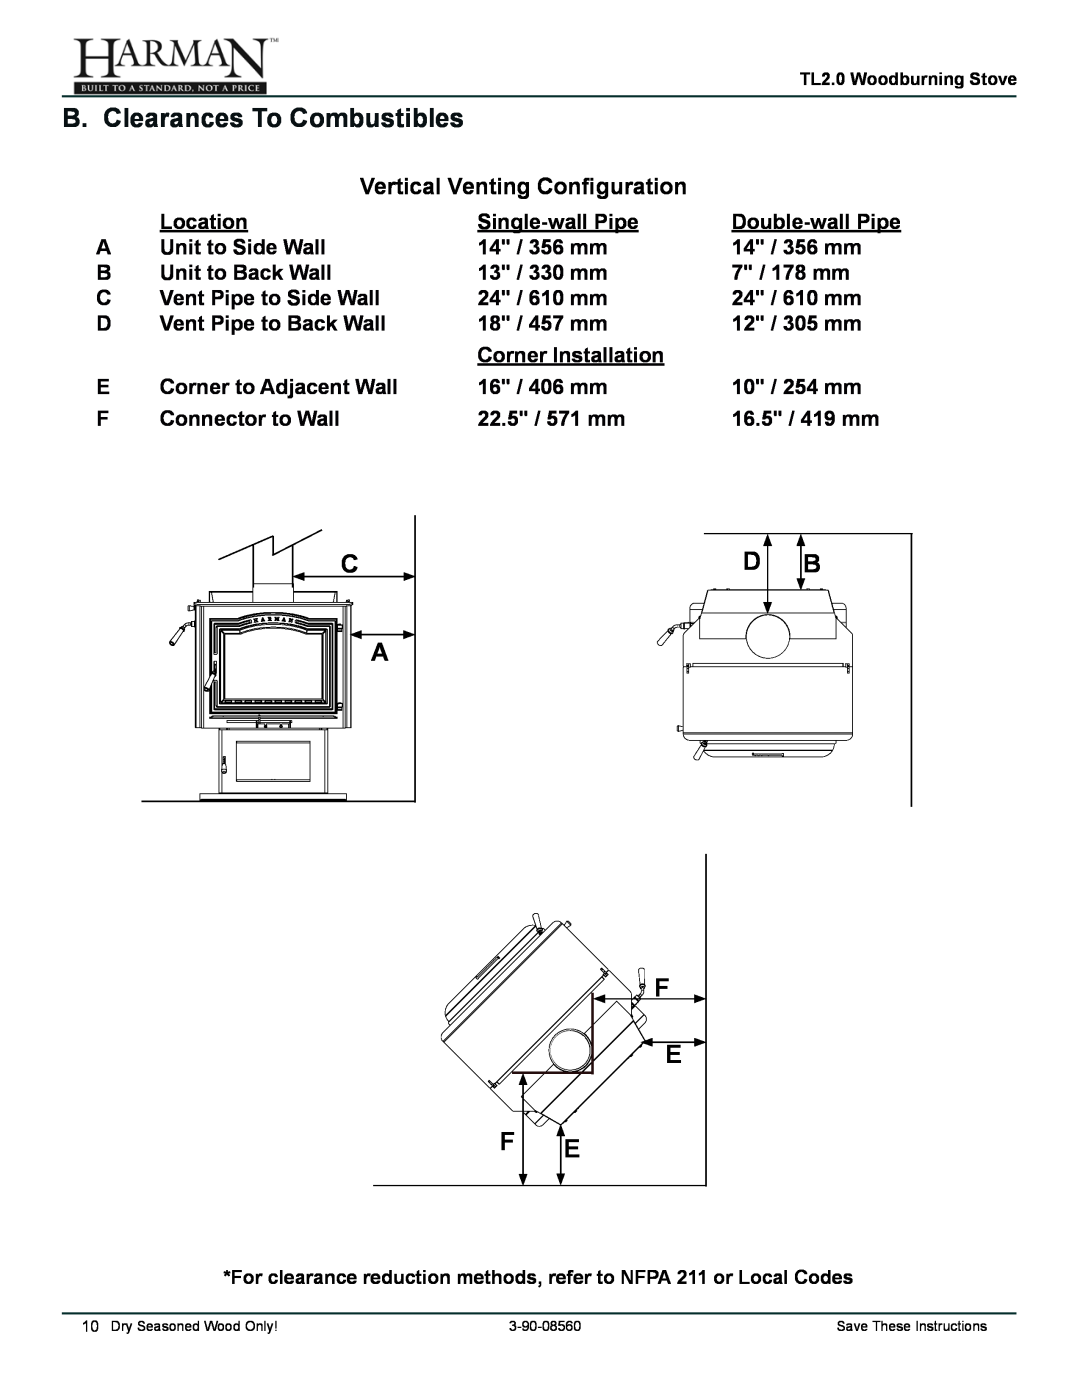 Harman Stove Company TL2.0 manual B. Clearances To Combustibles, Vertical Venting Configuration 